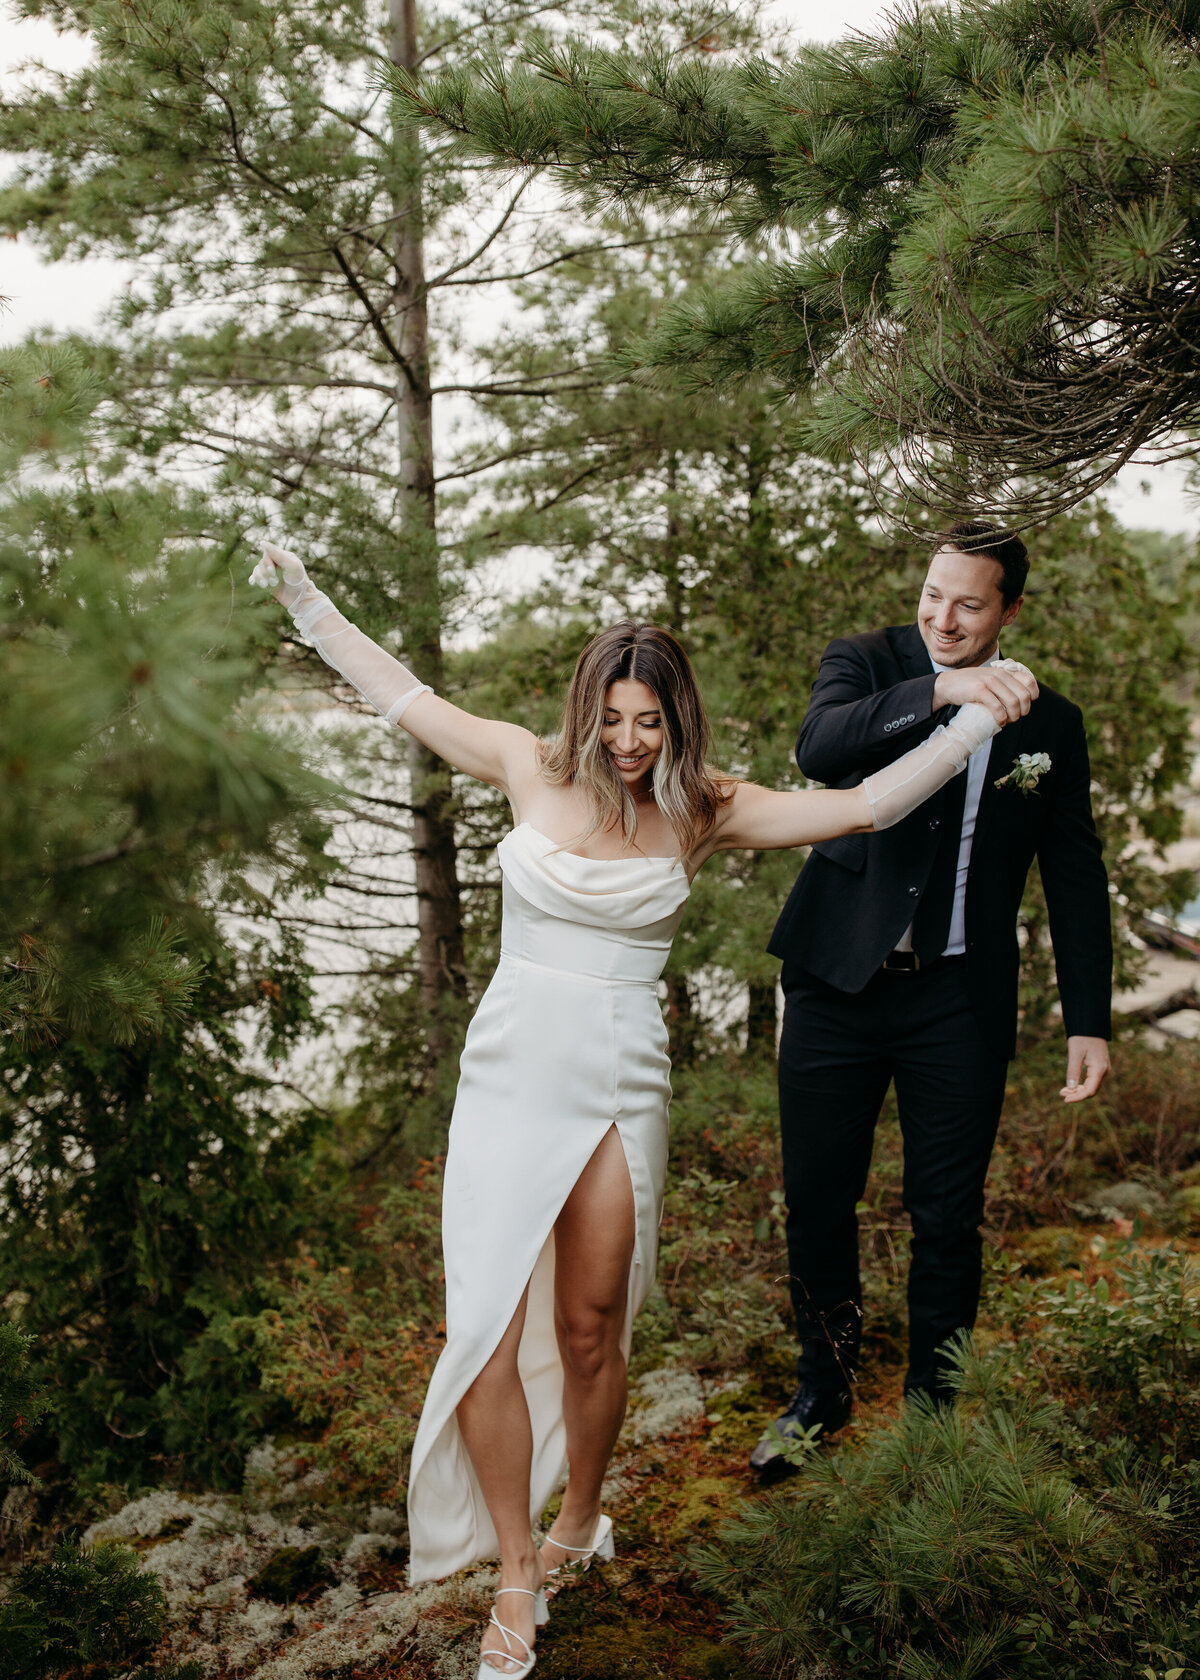 Bride in a chic white dress with a thigh-high slit and groom smiling as they navigate a rocky, wooded terrain